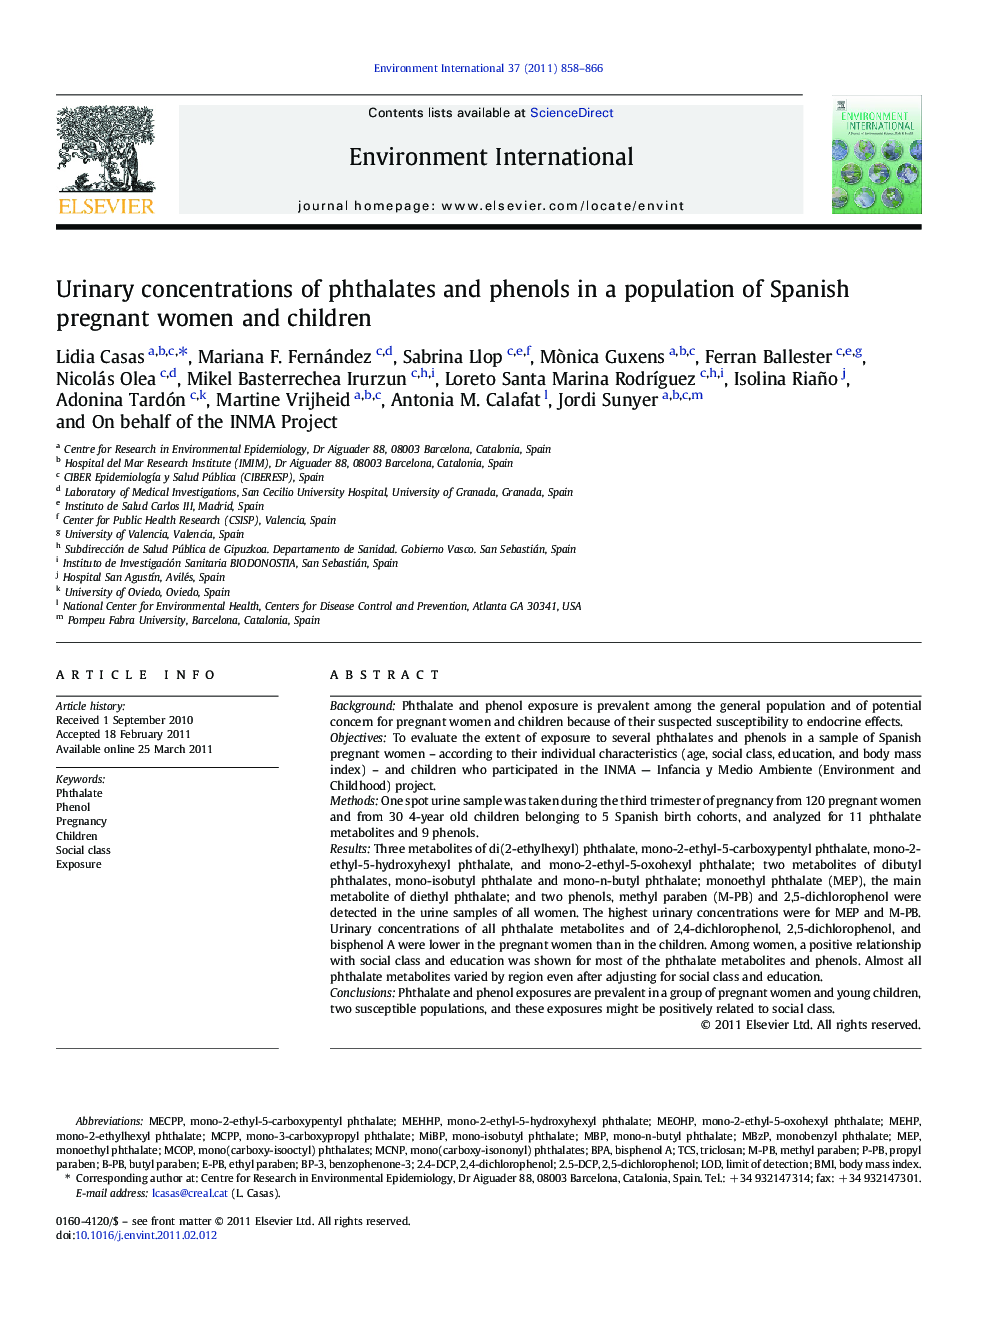 Urinary concentrations of phthalates and phenols in a population of Spanish pregnant women and children